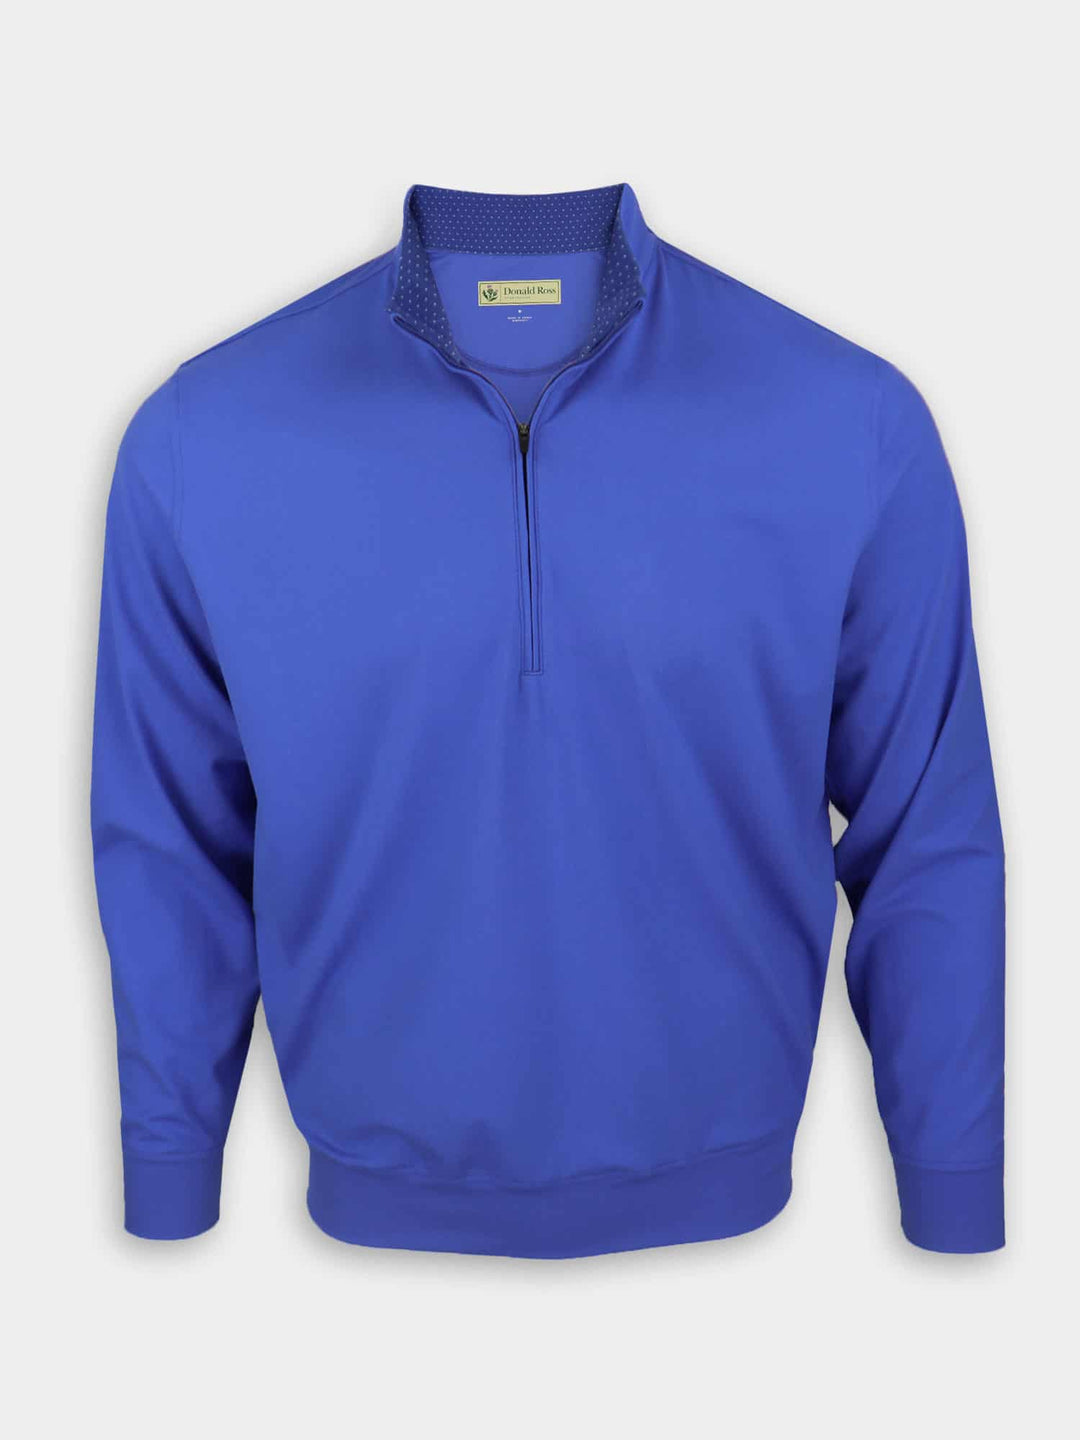 Donald Ross Mens Classic Fit TYR Plaid Pullover - ROYAL